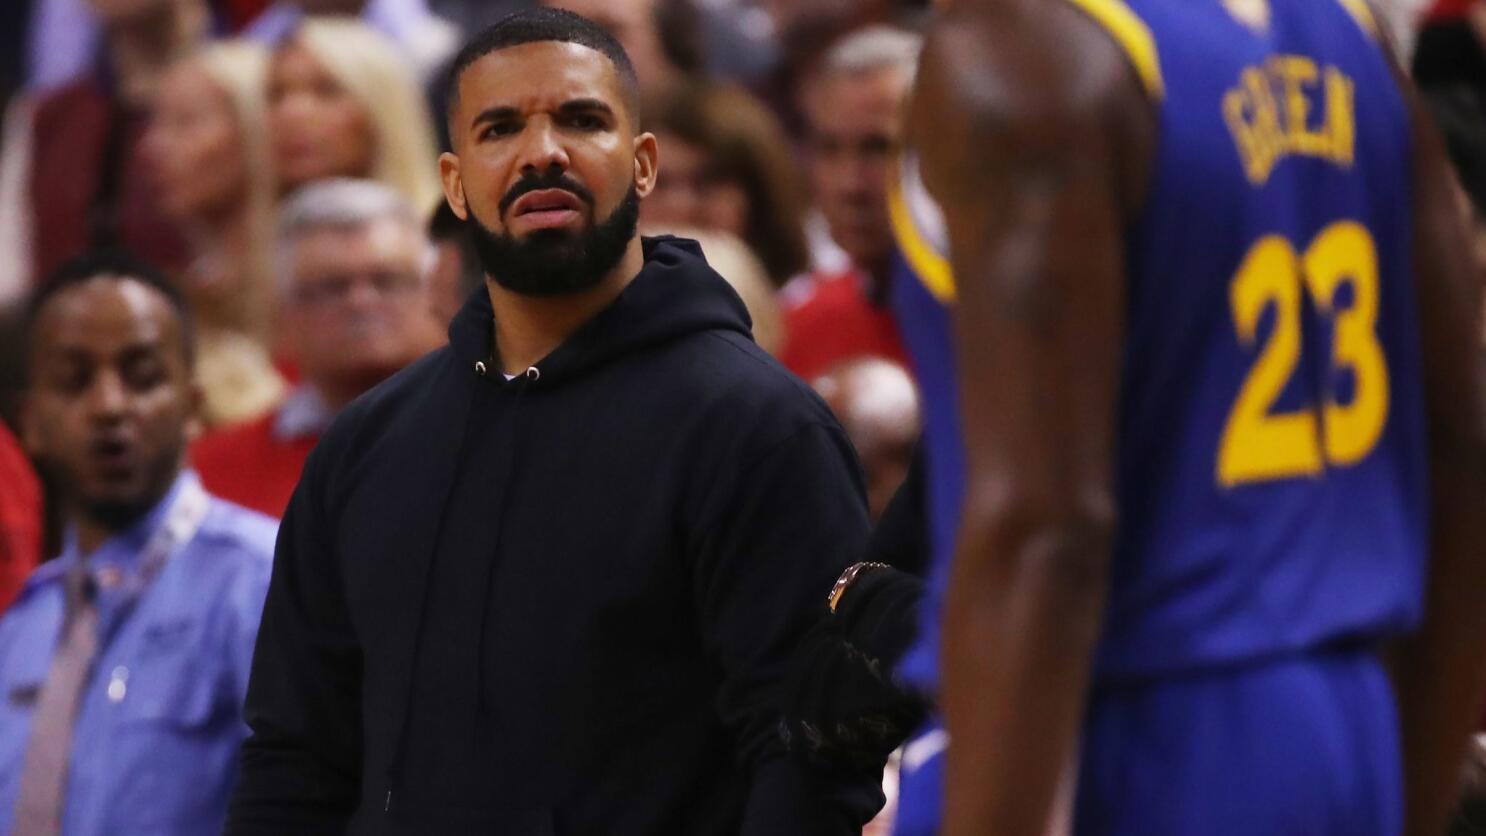 Drake wears vintage Toronto Raptors jersey of Steph Curry's father